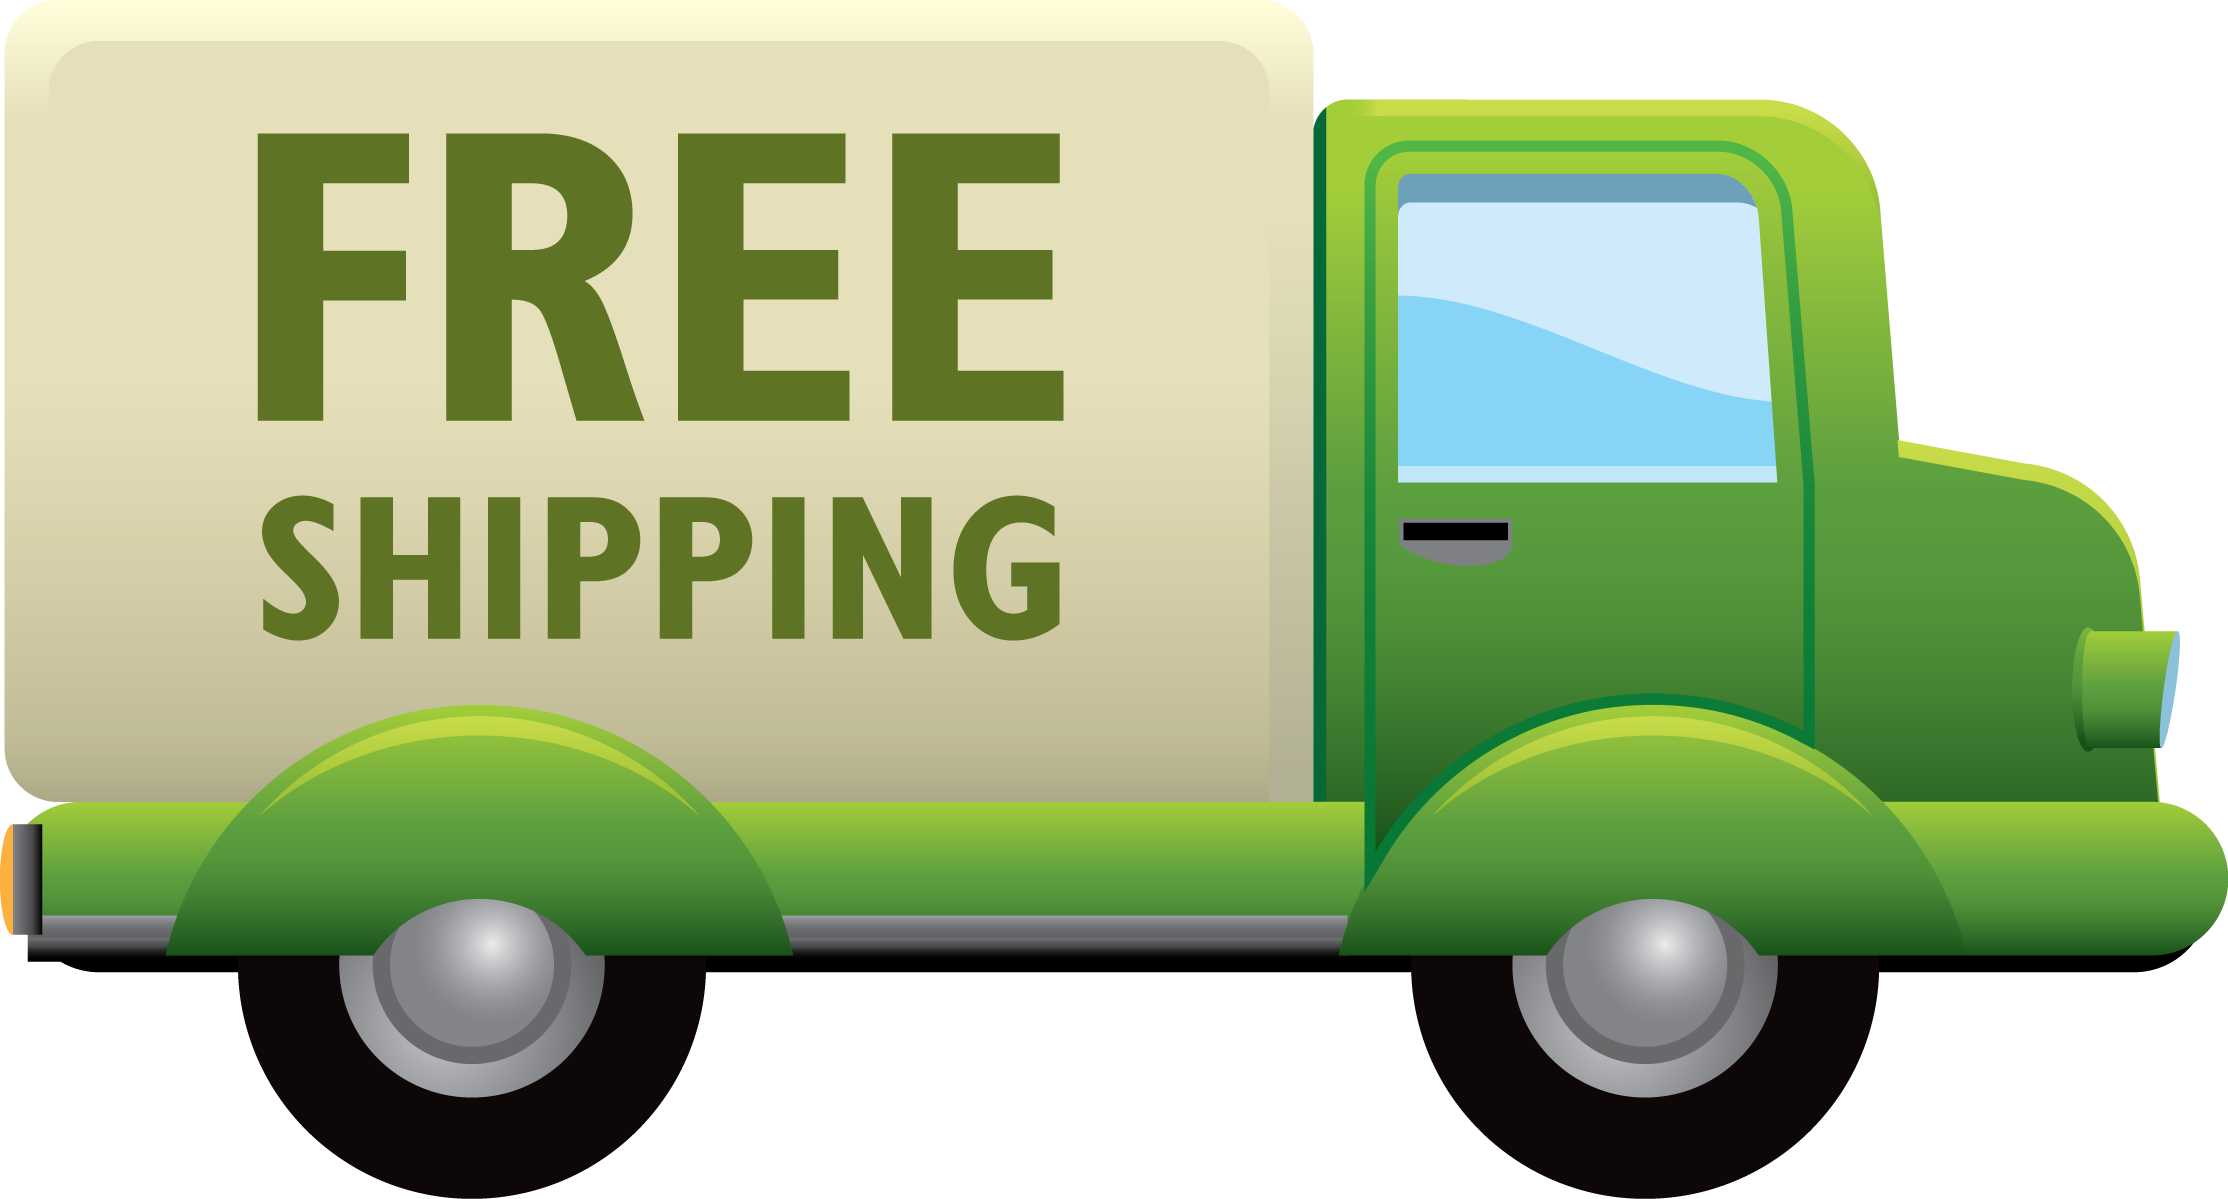 iHerb free shipping code. How get coupon code for free international